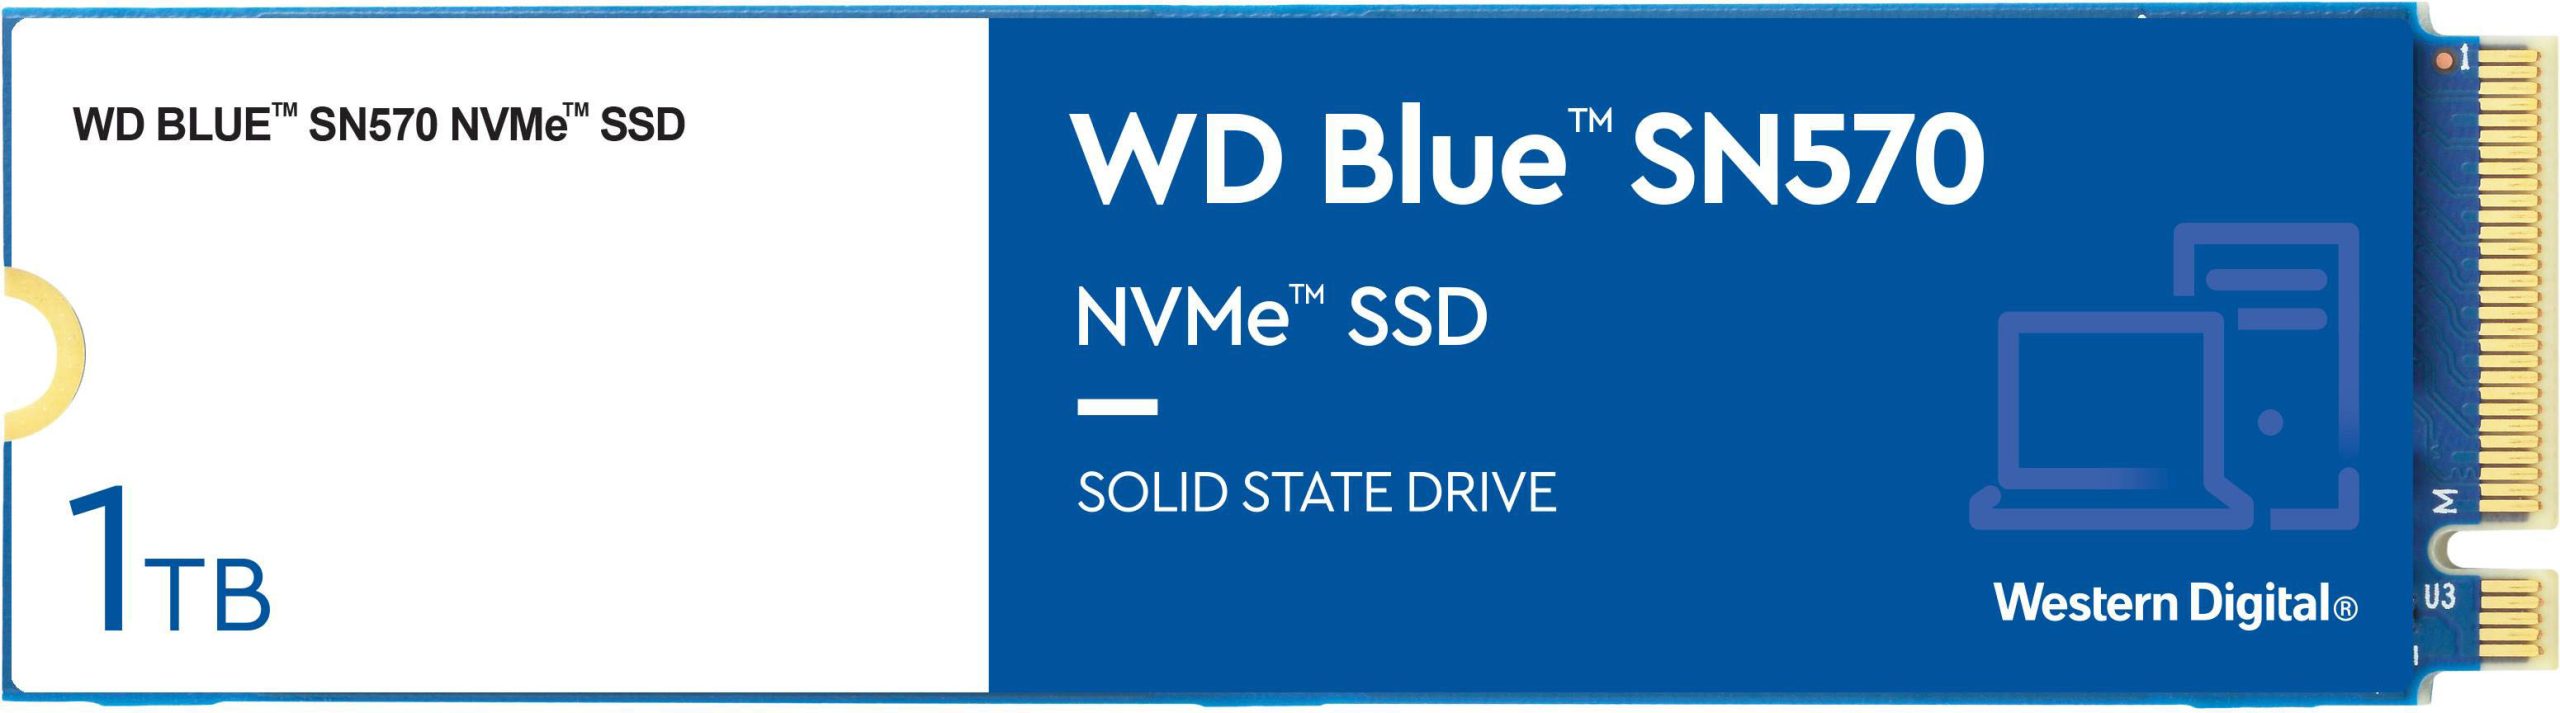 WD – Blue SN570 1TB Internal PCIe Gen3 x4 Solid State Drive for Laptops & Desktops – Just $79.99 at Best Buy